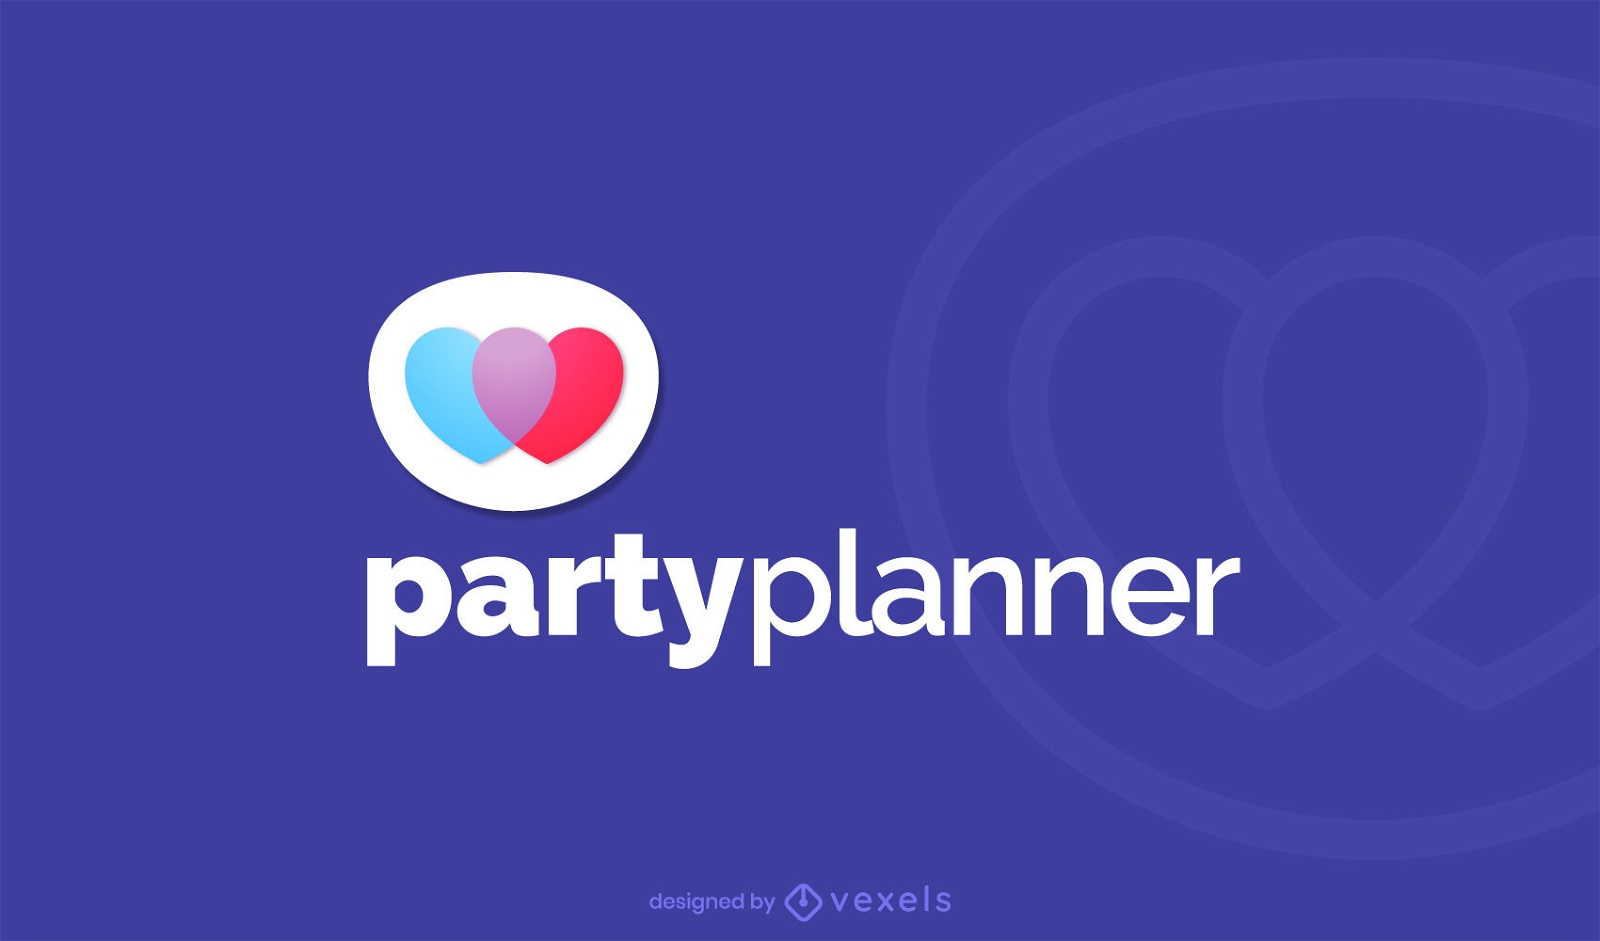 Party planner hearts gradient logo